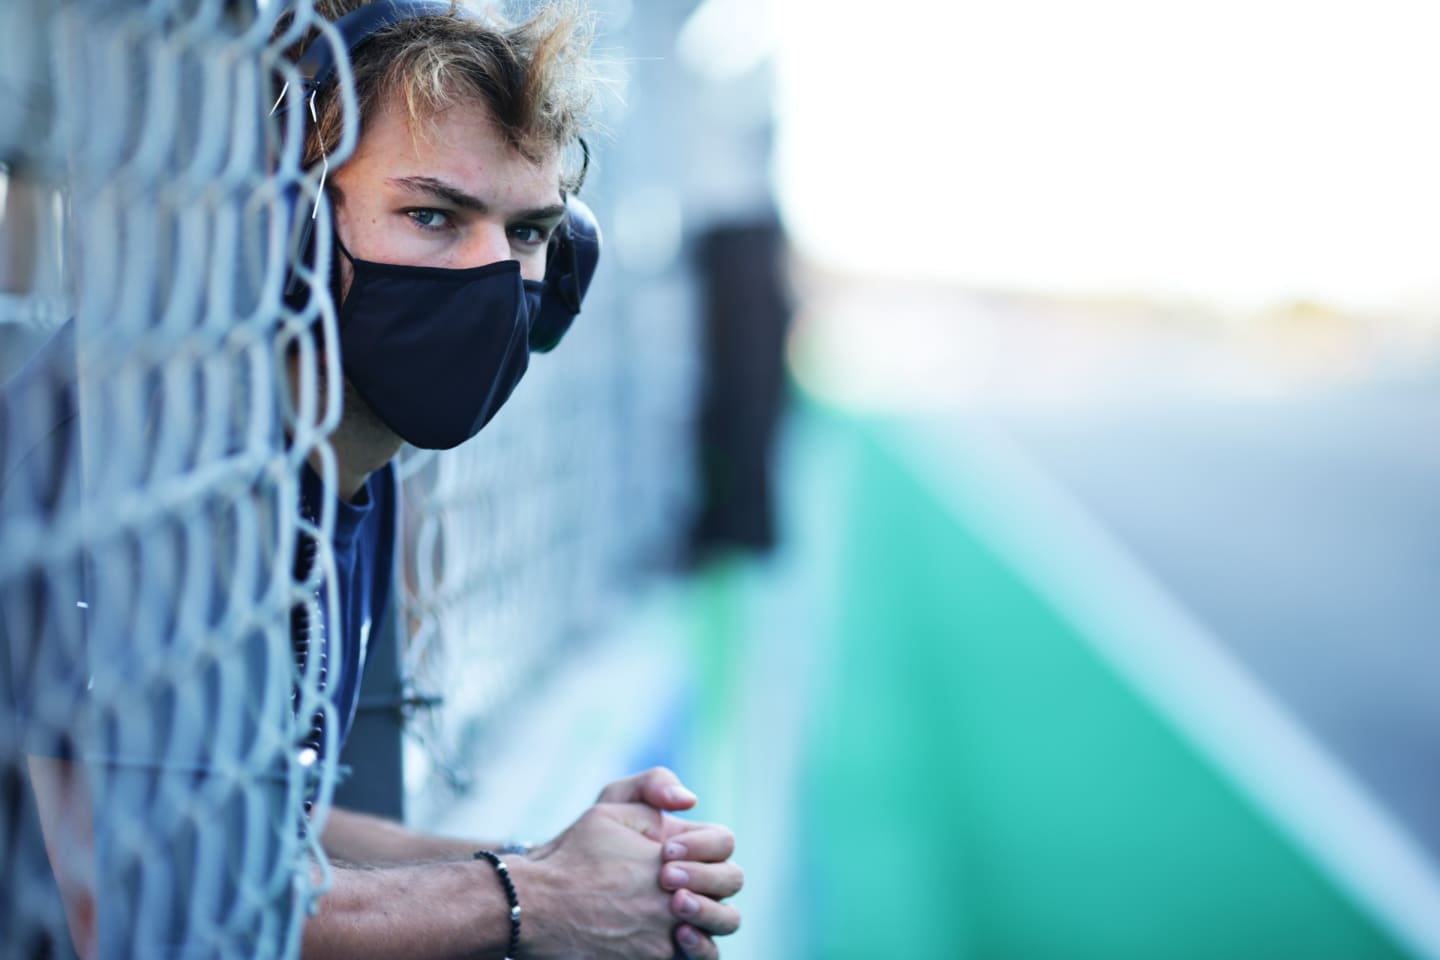 PORTIMAO, PORTUGAL - OCTOBER 23: Pierre Gasly of France and Scuderia AlphaTauri looks on from the pitwall during practice ahead of the F1 Grand Prix of Portugal at Autodromo Internacional do Algarve on October 23, 2020 in Portimao, Portugal. (Photo by Peter Fox/Getty Images)